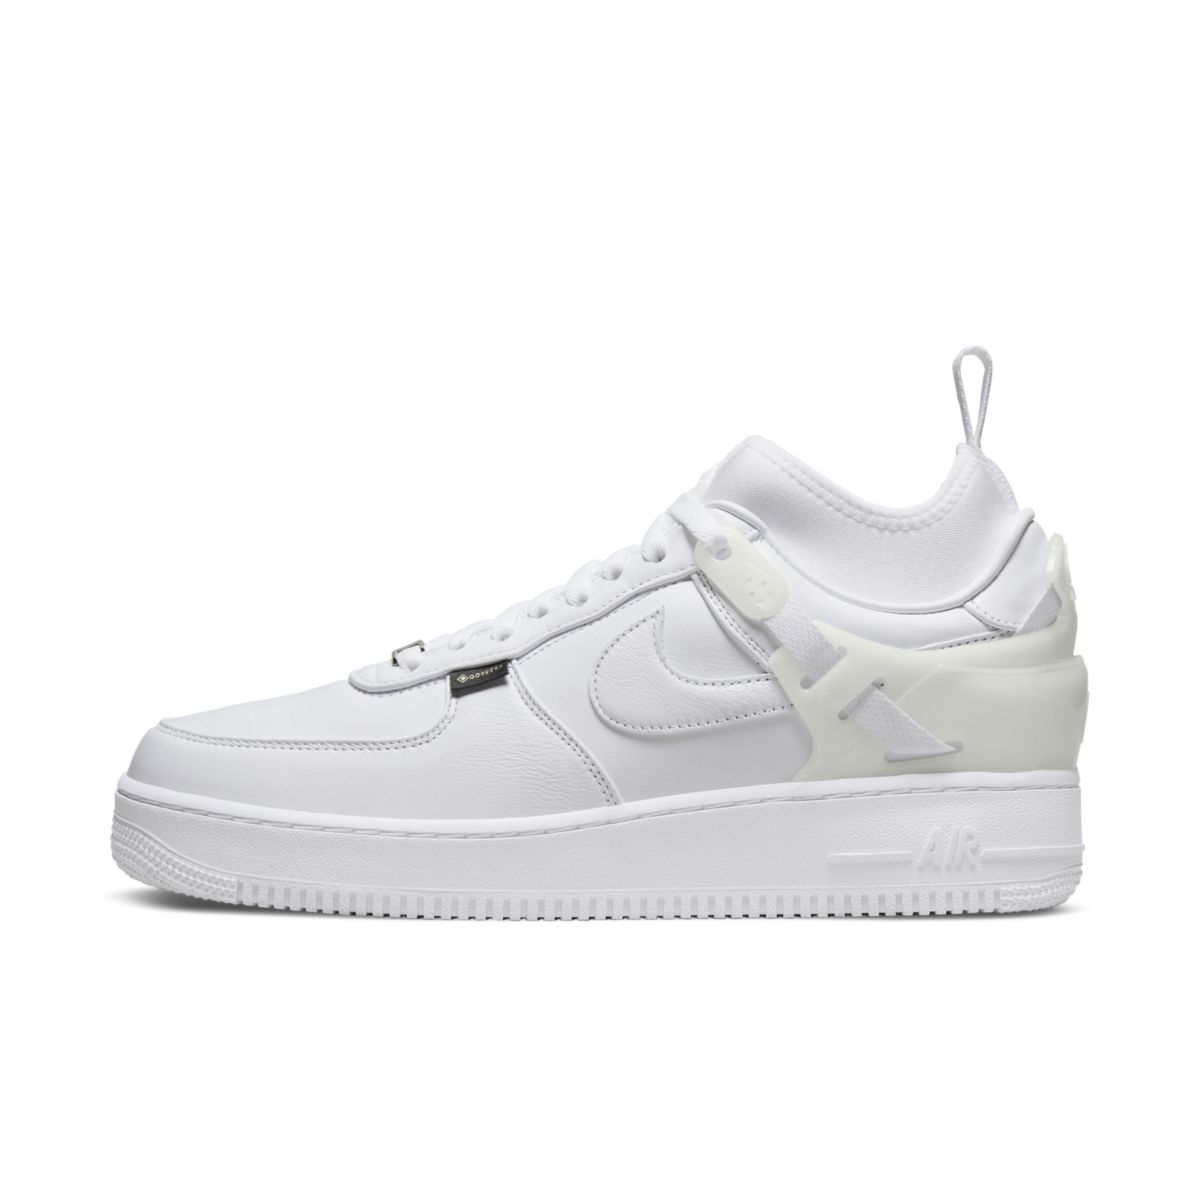 Undercover x Nike Air Force 1 Low White DQ7558-101 2